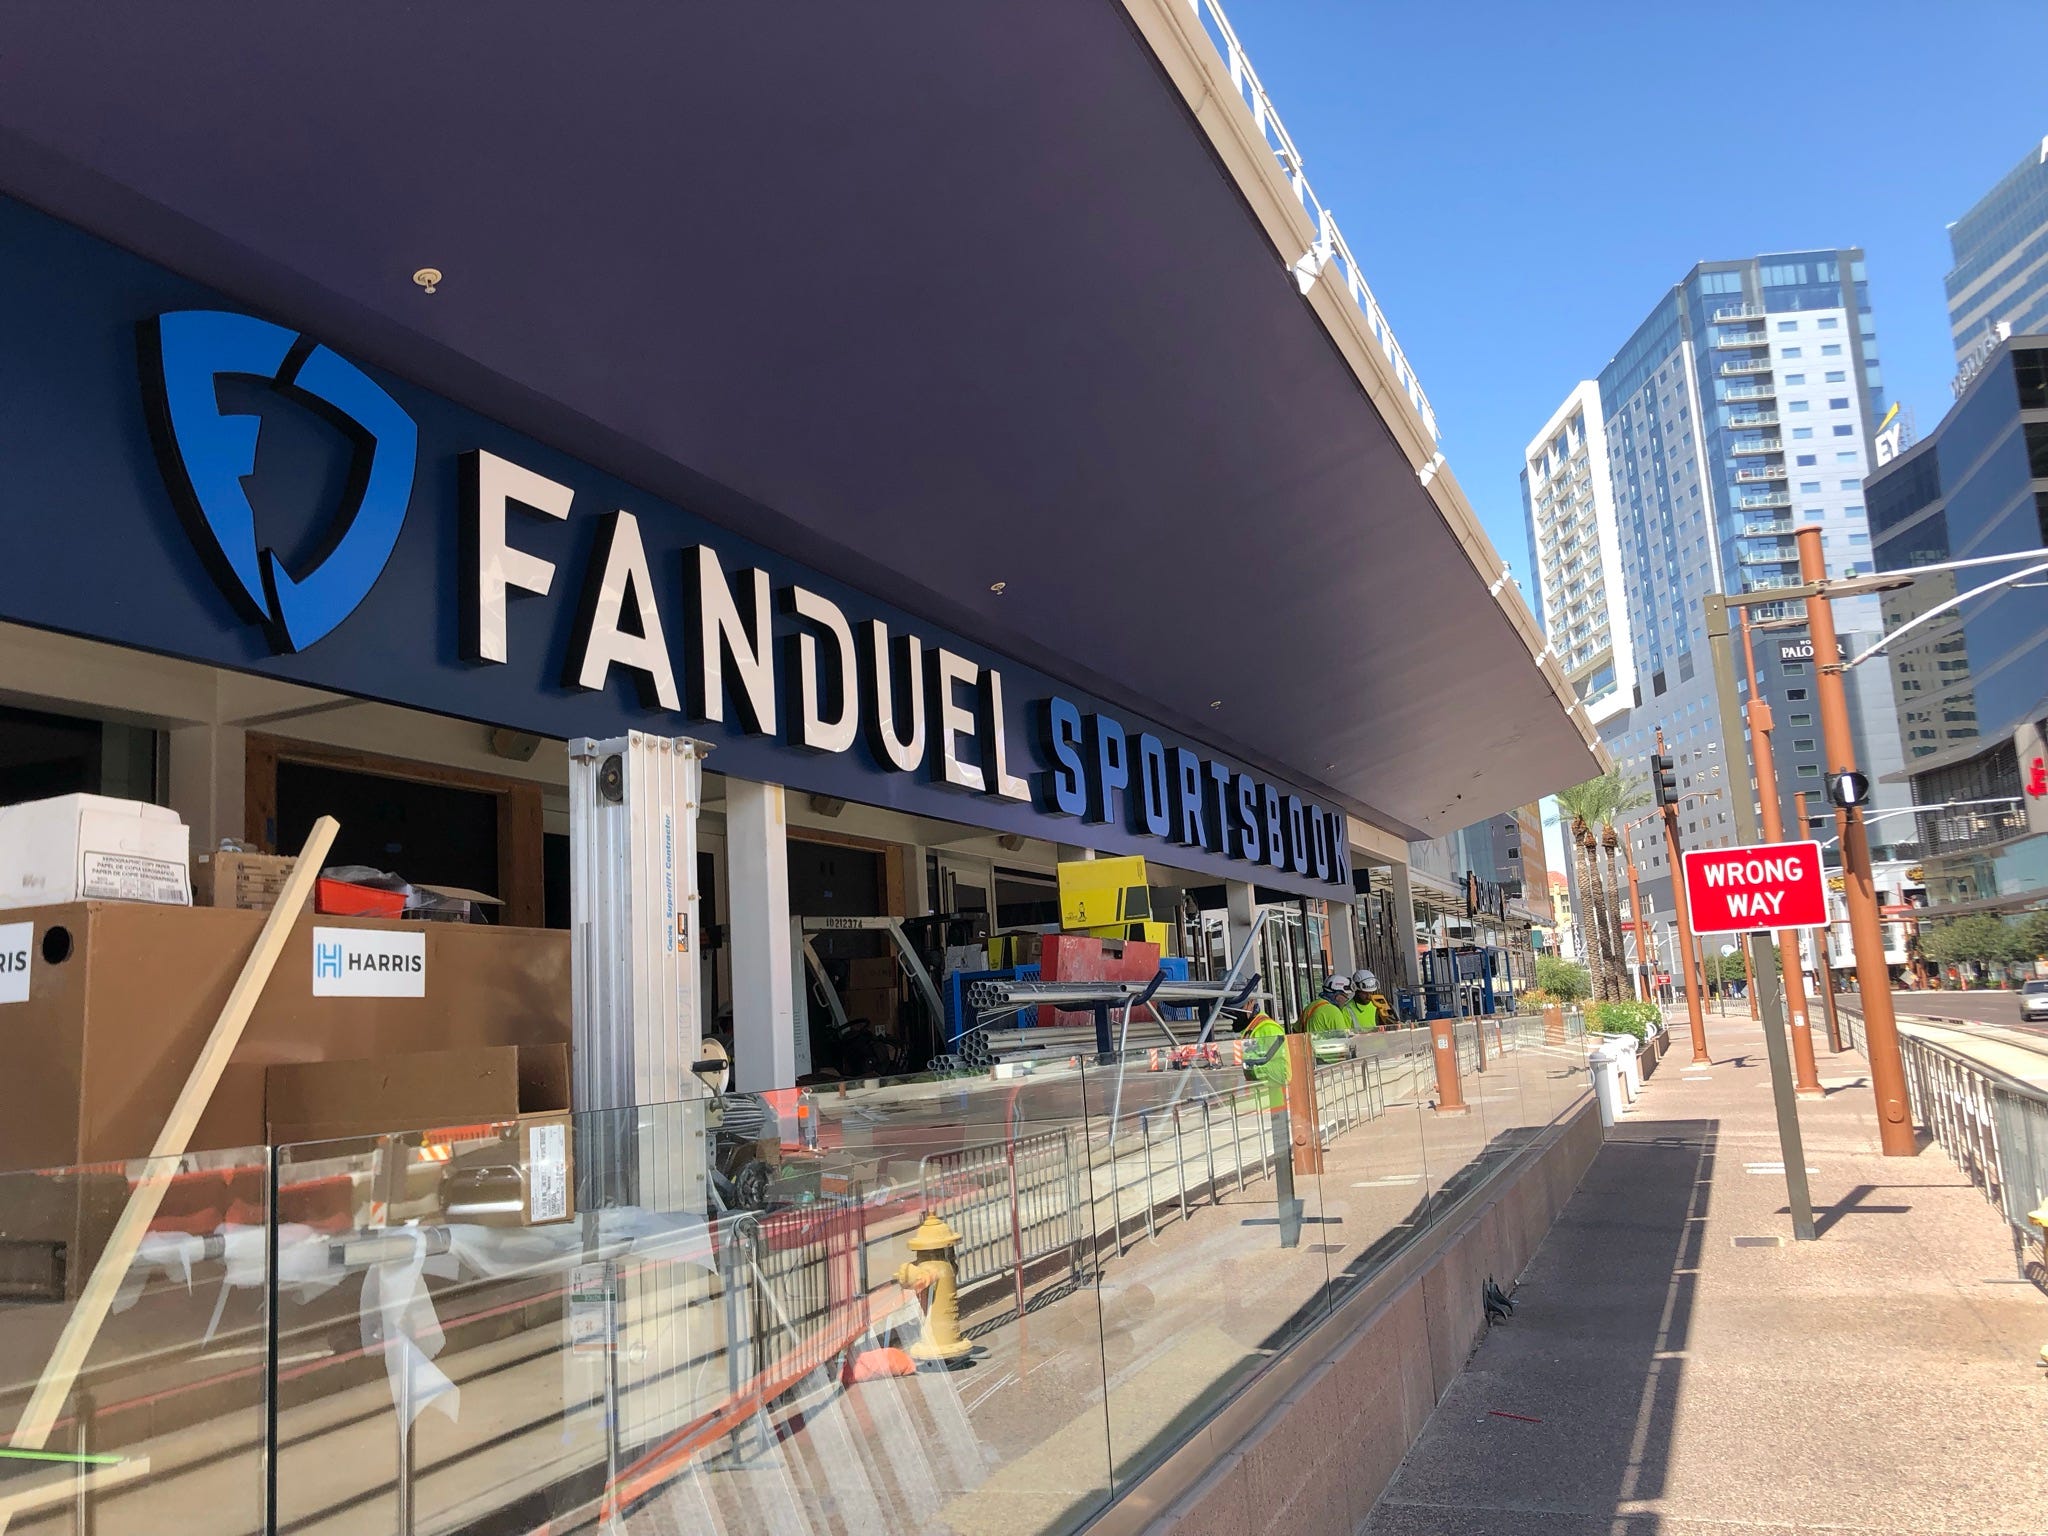 Construction crews worked on creating the FanDuel Sportsbook on the north end of Footprint Center, the home of the NBA's Phoenix Suns.